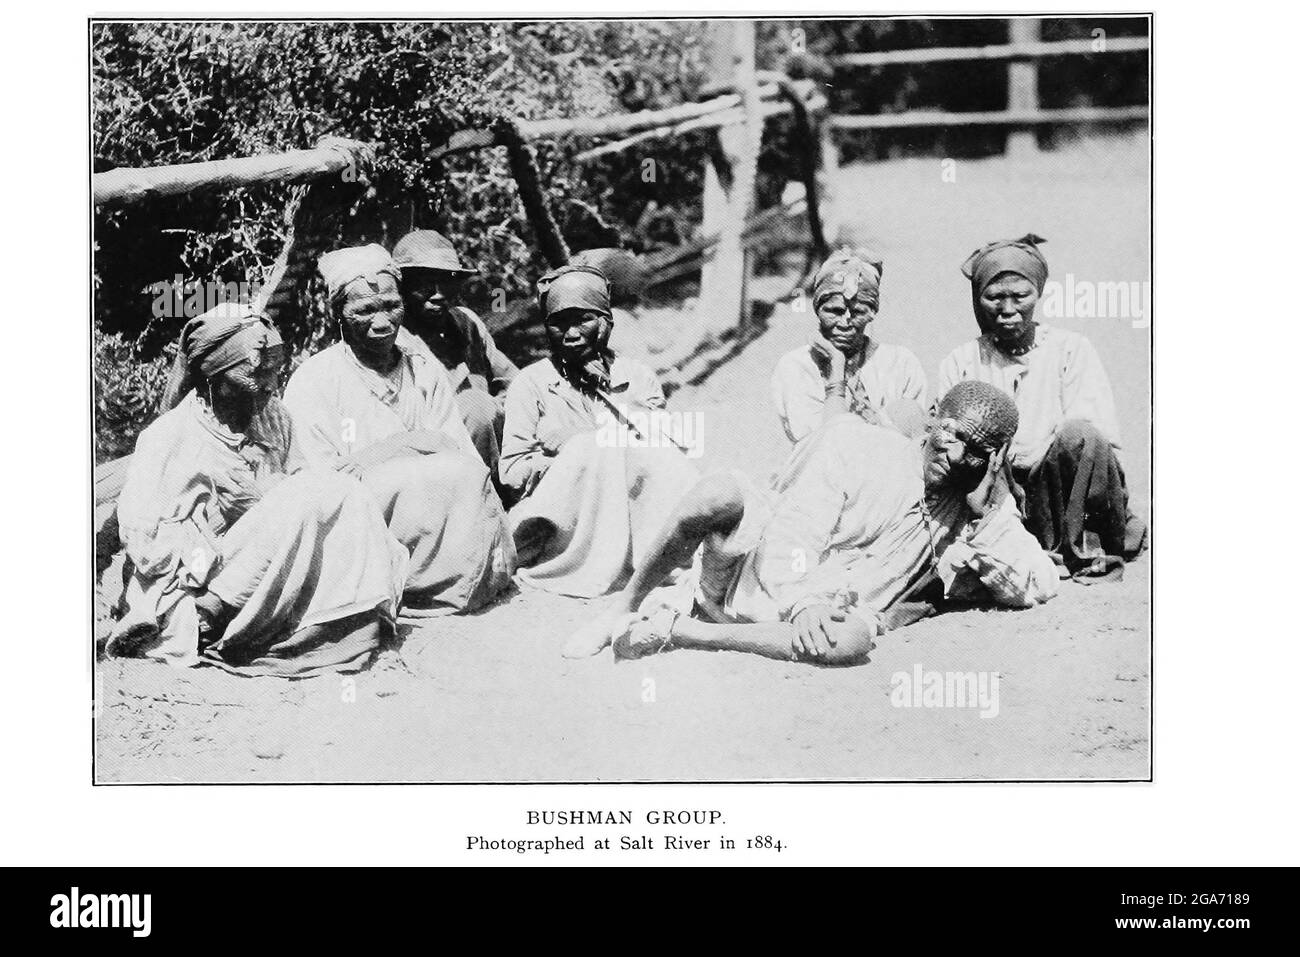 Bushman Group Photographed at Salt River in 1884 From the book '  Specimens of Bushman folklore ' by Bleek, W. H. I. (Wilhelm Heinrich Immanuel), Lloyd, Lucy Catherine, Theal, George McCall, 1837-1919 Published in London by  G. Allen & Company, ltd. in 1911. The San peoples (also Saan), or Bushmen, are members of various Khoe, Tuu, or Kxʼa-speaking indigenous hunter-gatherer groups that are the first nations of Southern Africa, and whose territories span Botswana, Namibia, Angola, Zambia, Zimbabwe, Lesotho and South Africa. Stock Photo